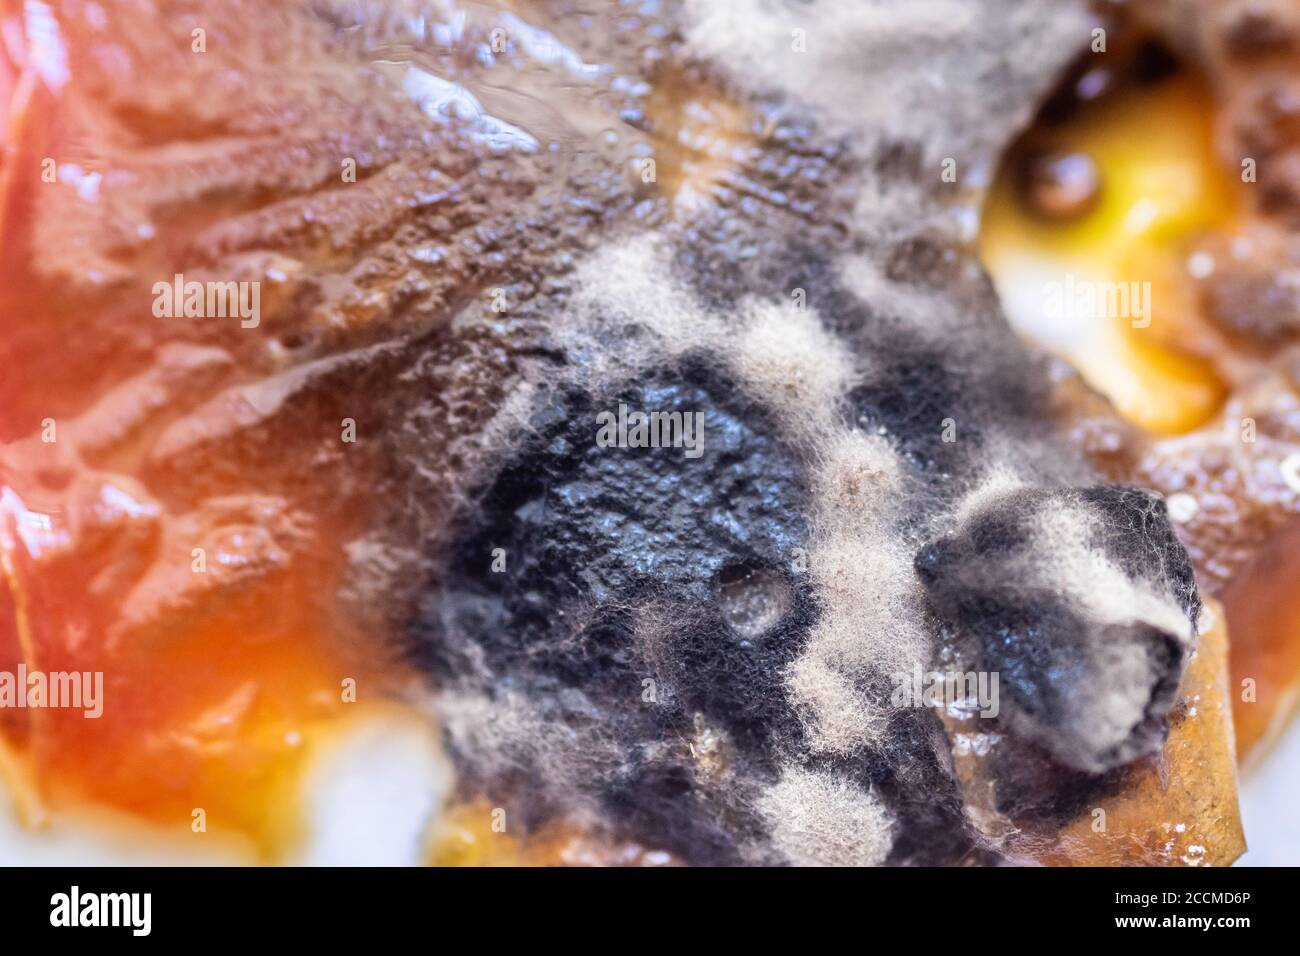 view of growing mold on the surface of a rotten tomato. Stock Photo